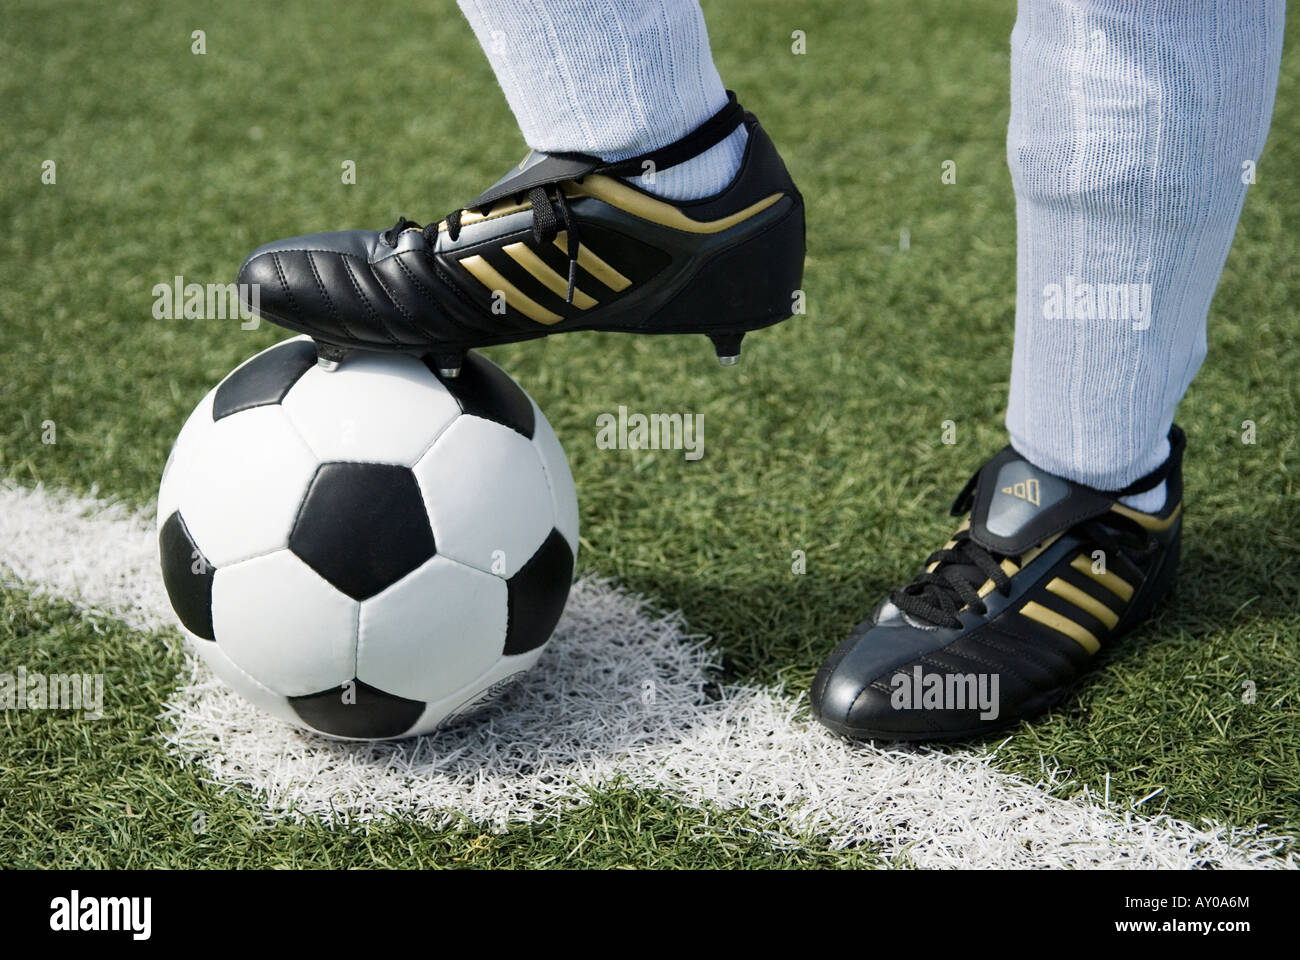 Alas bombilla Avispón the feet of a football player in white stockings and a vintage black and  white football Stock Photo - Alamy